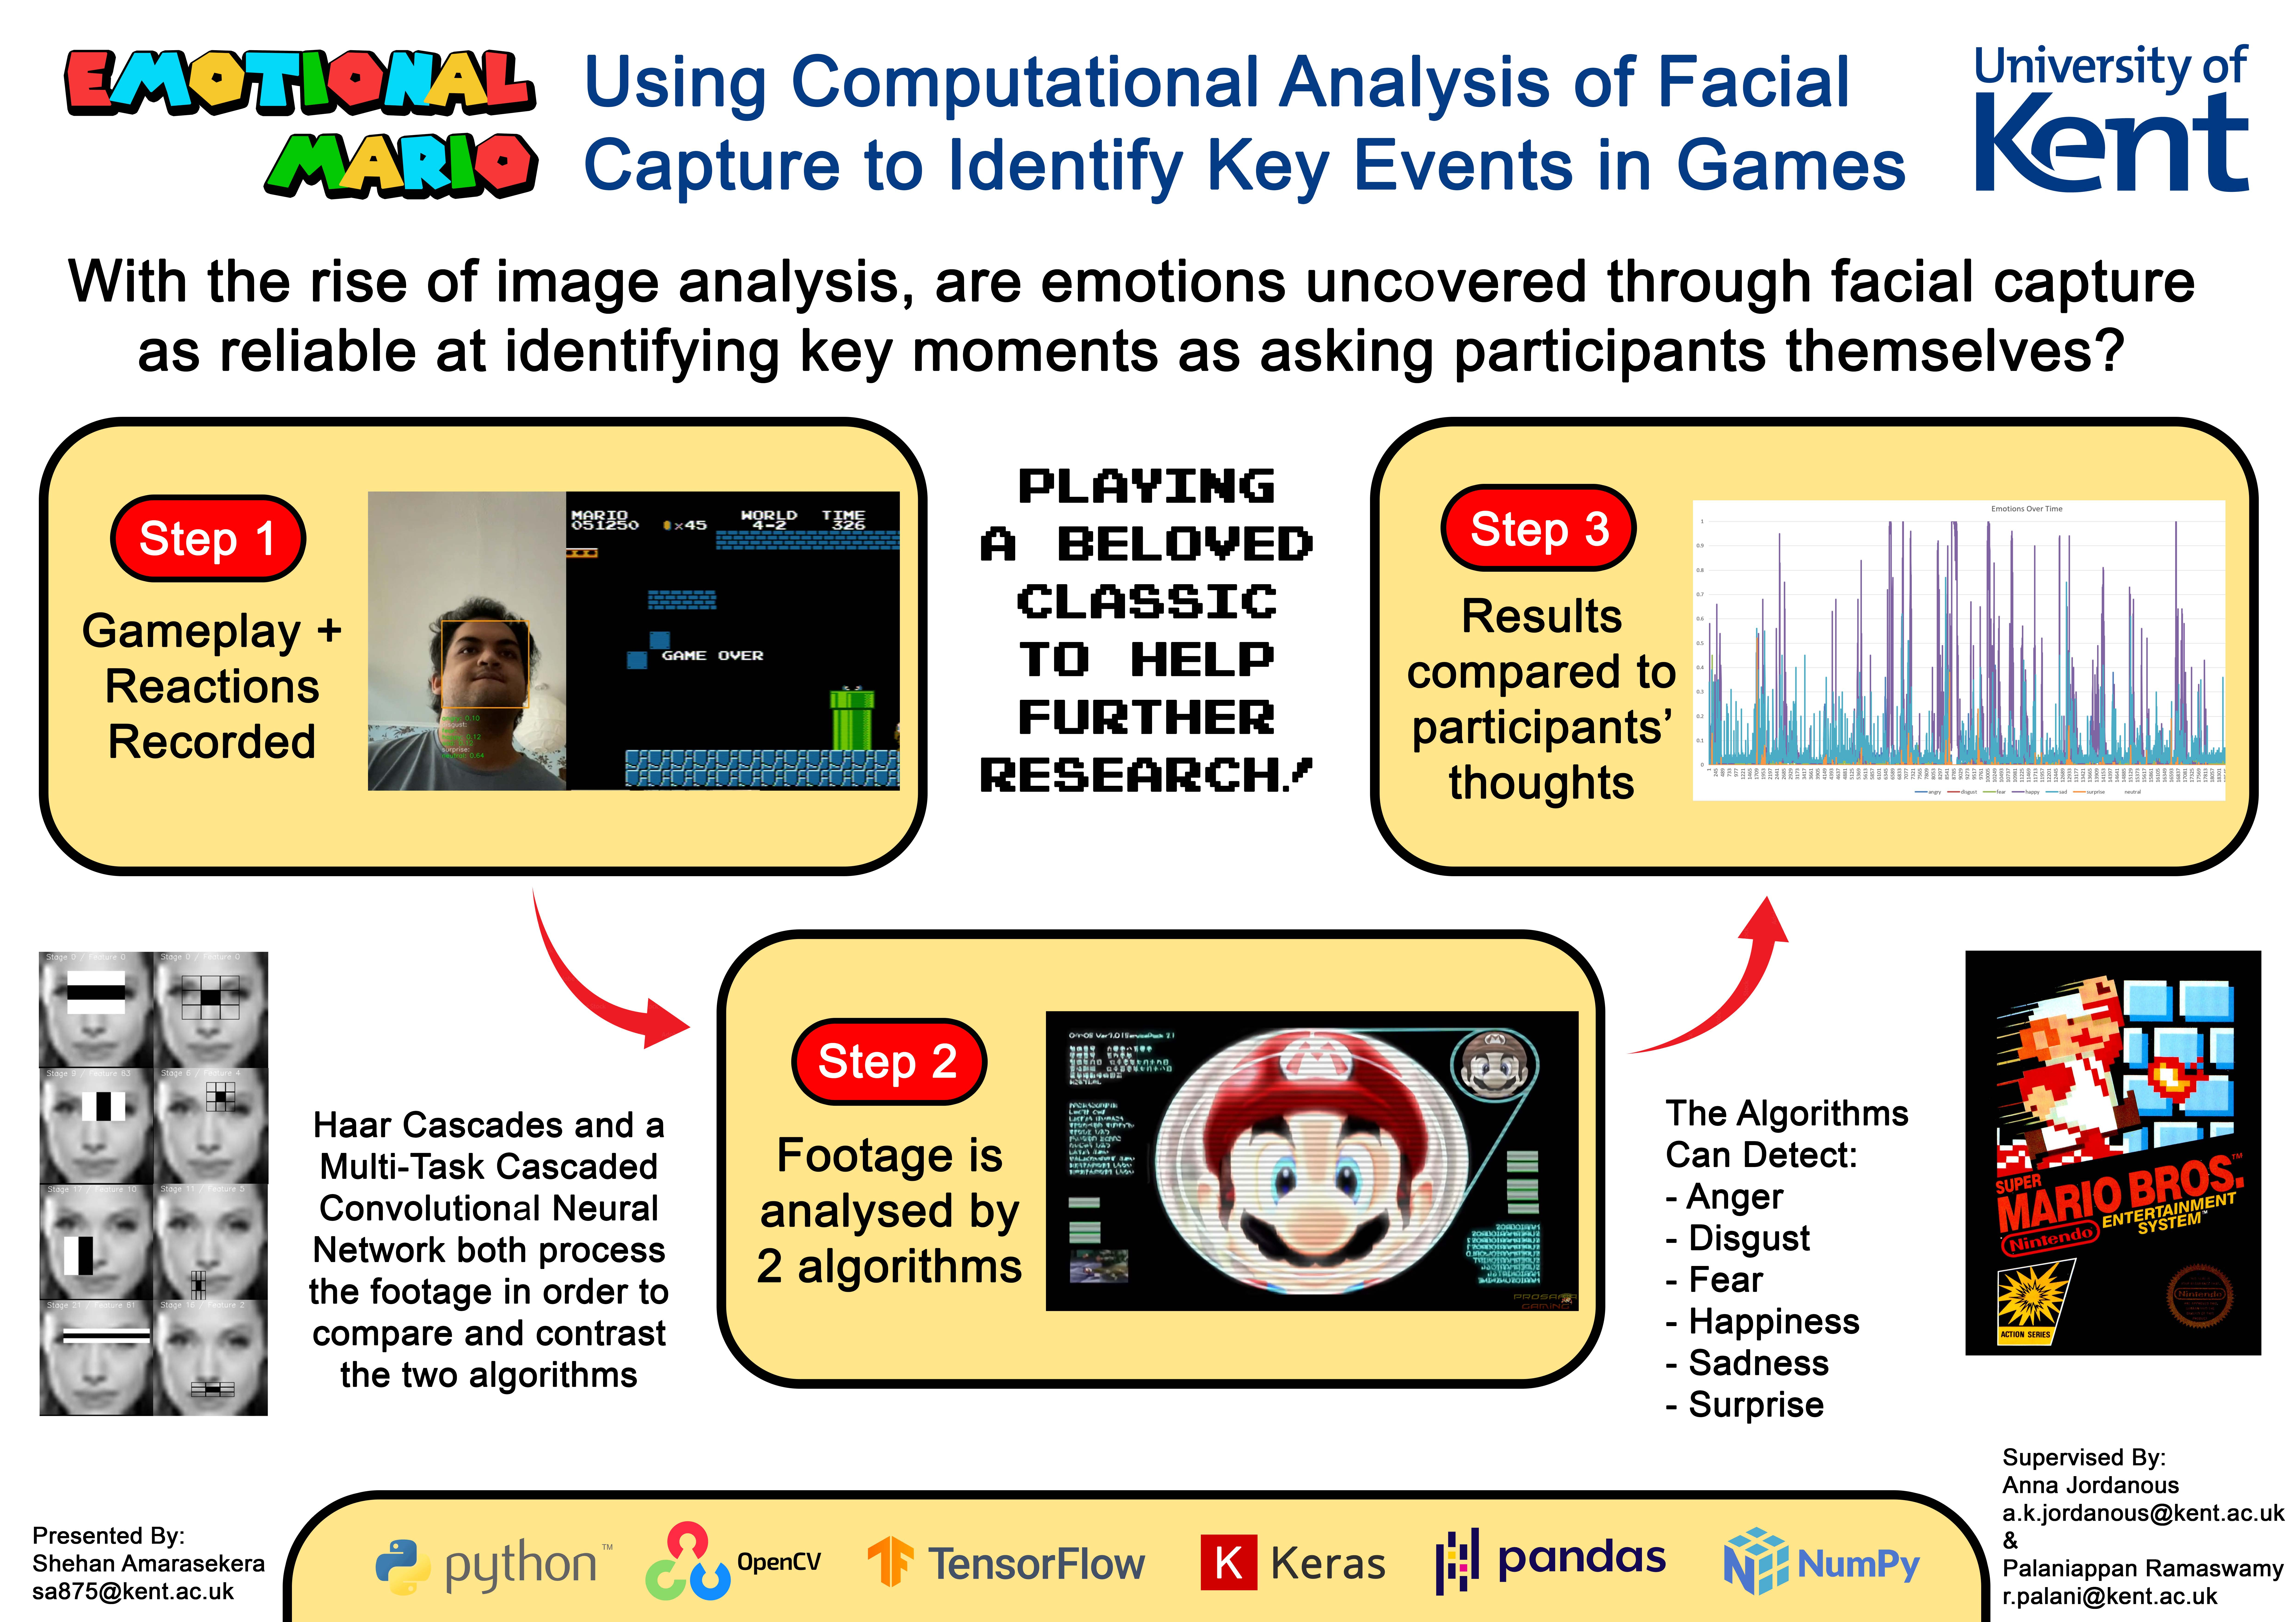 Using computational analysis of facial capture to identify key events in video games